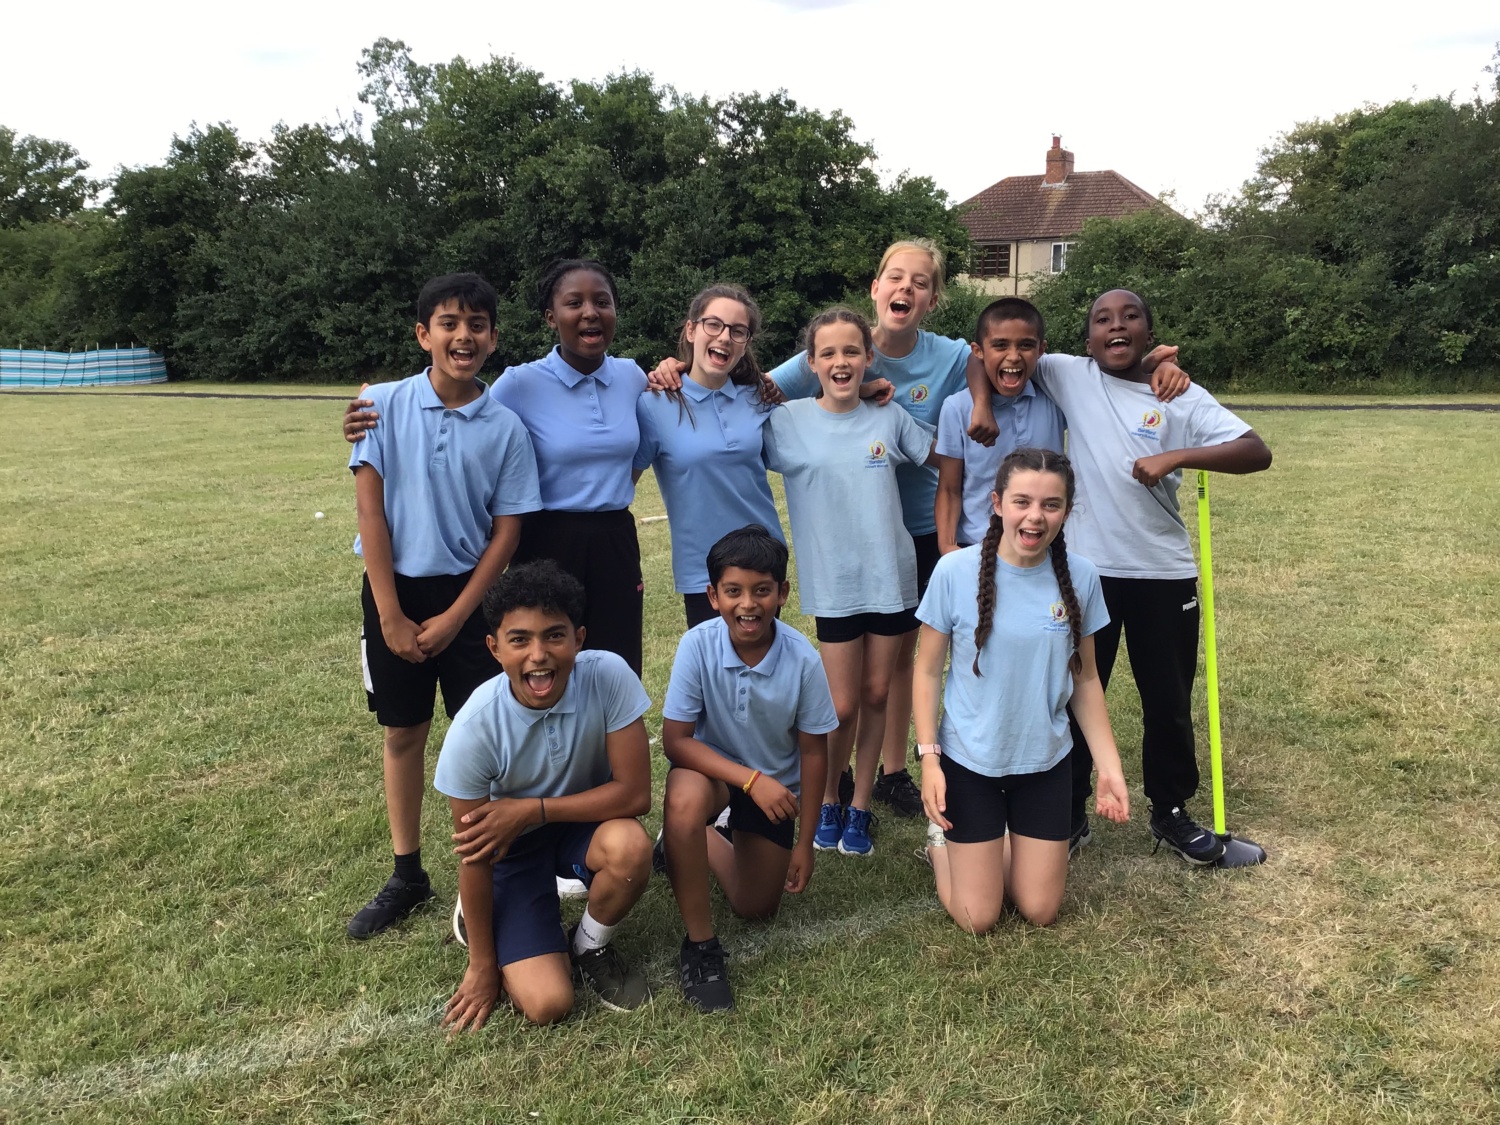 DPA students celebrating their wins at rounders in a field